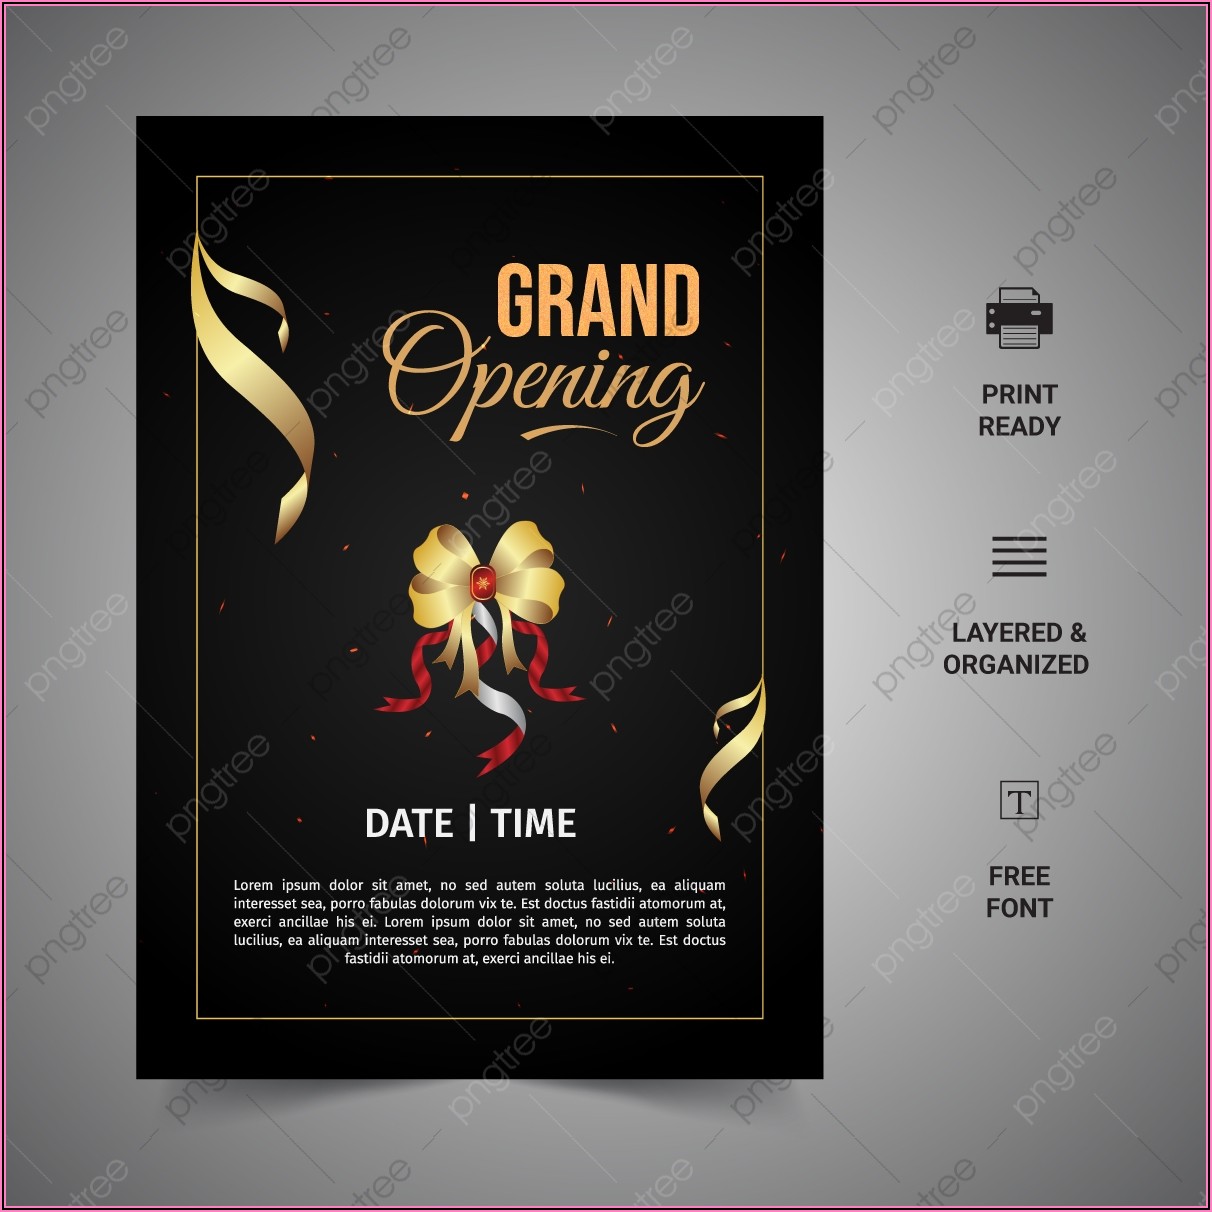 Grand Opening Invitation Card Template Free Download